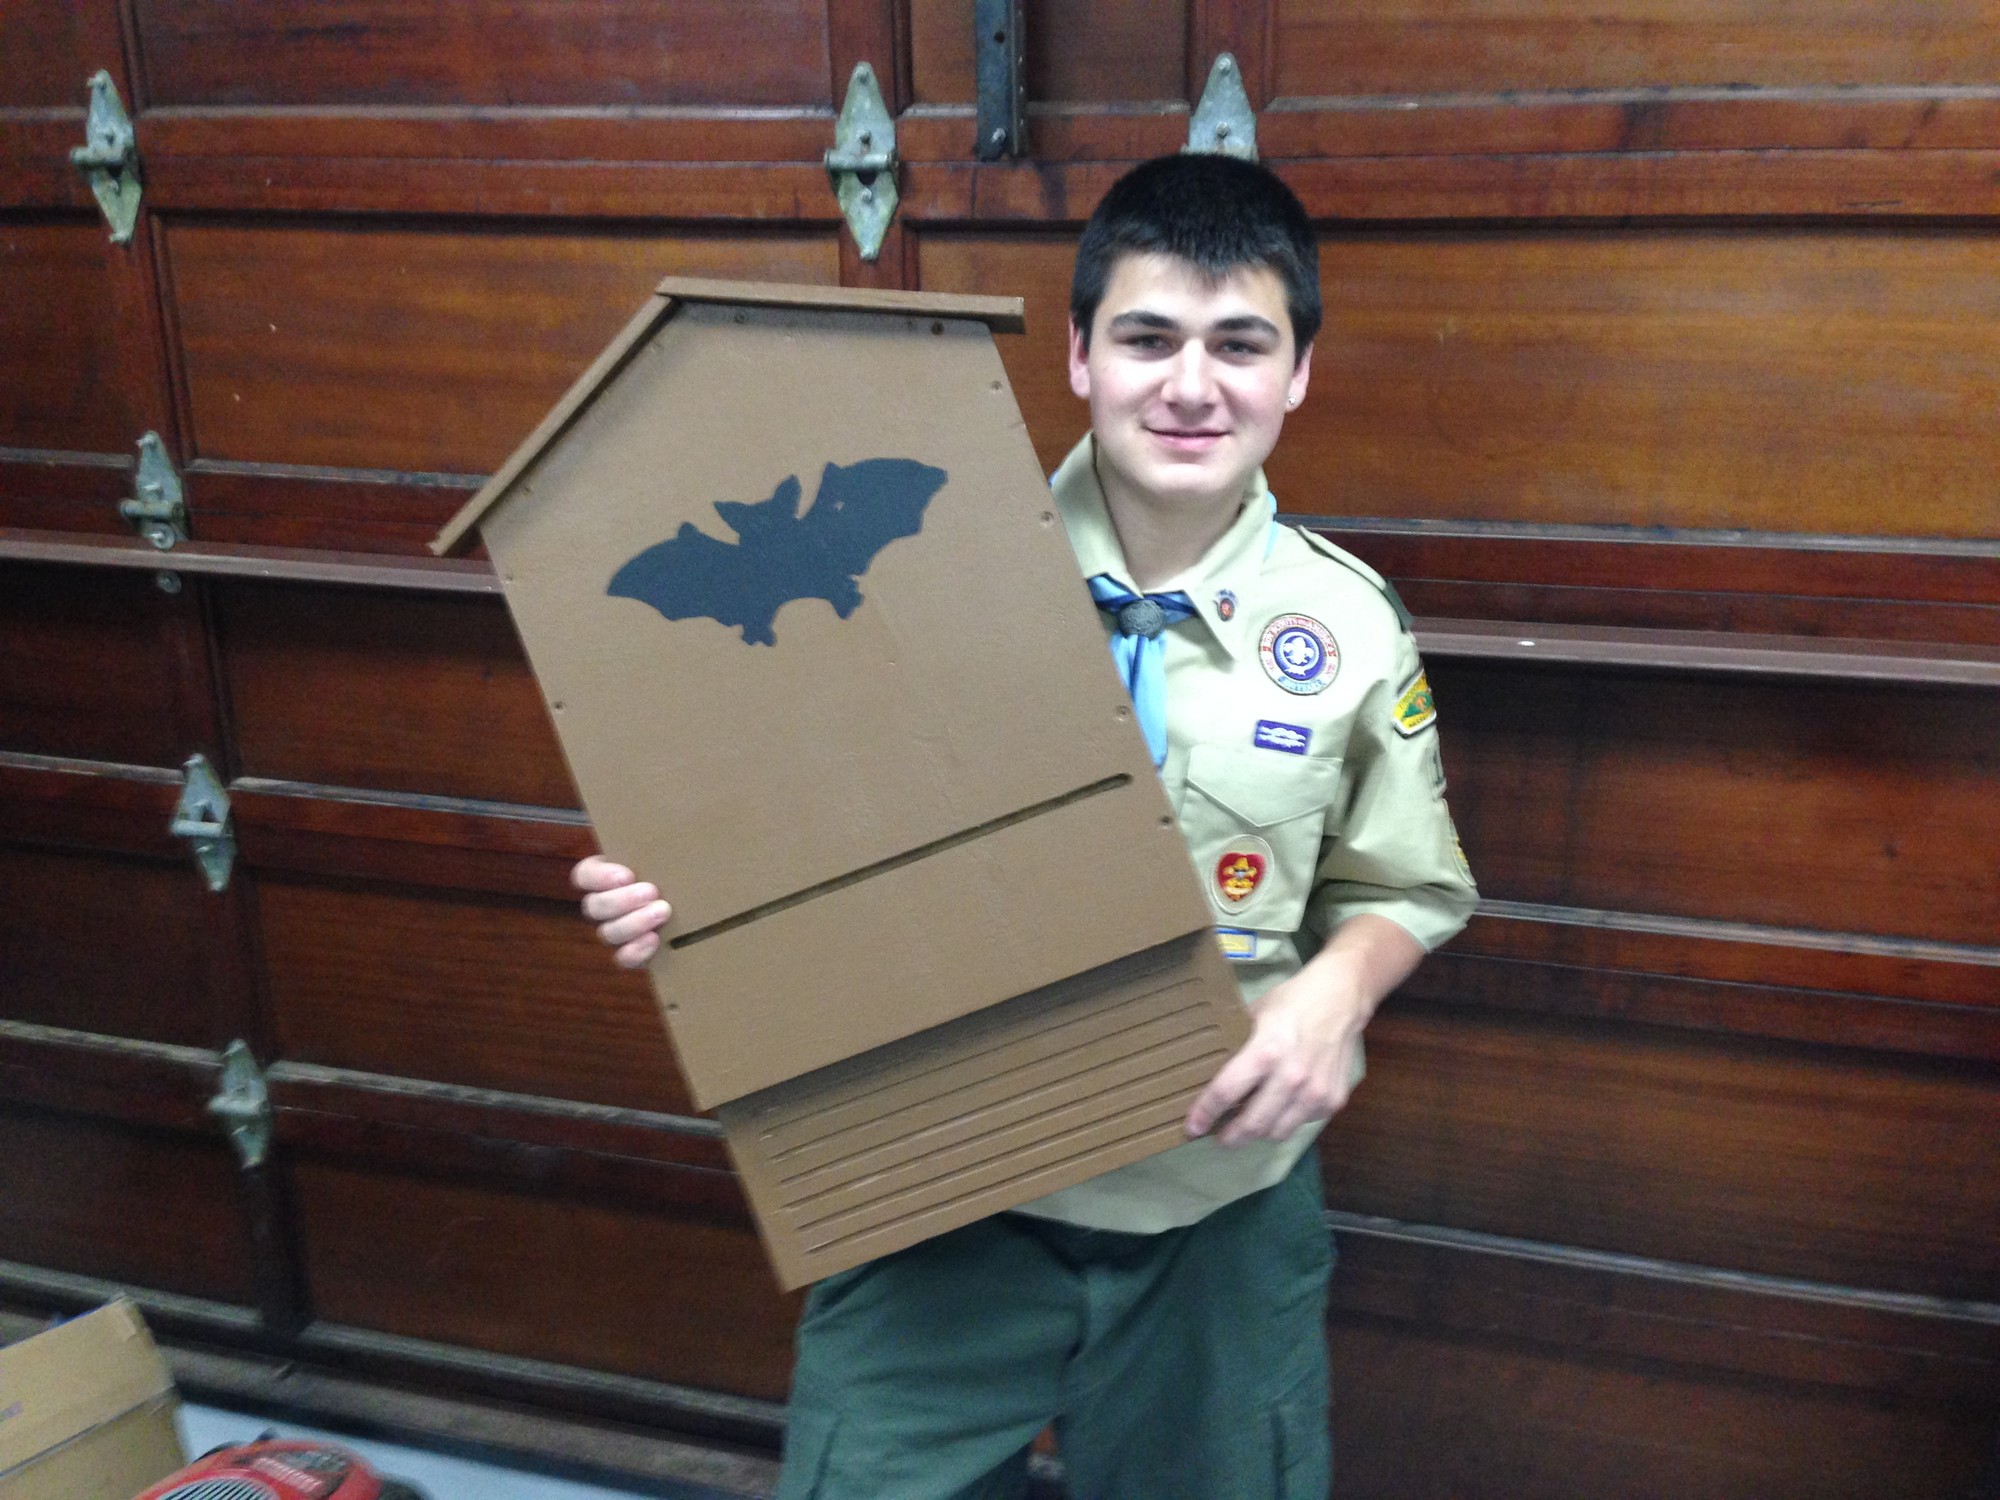 David Glaittli spearheaded the construction of the bat boxes for the village as his required community service project for Eagle Scout.